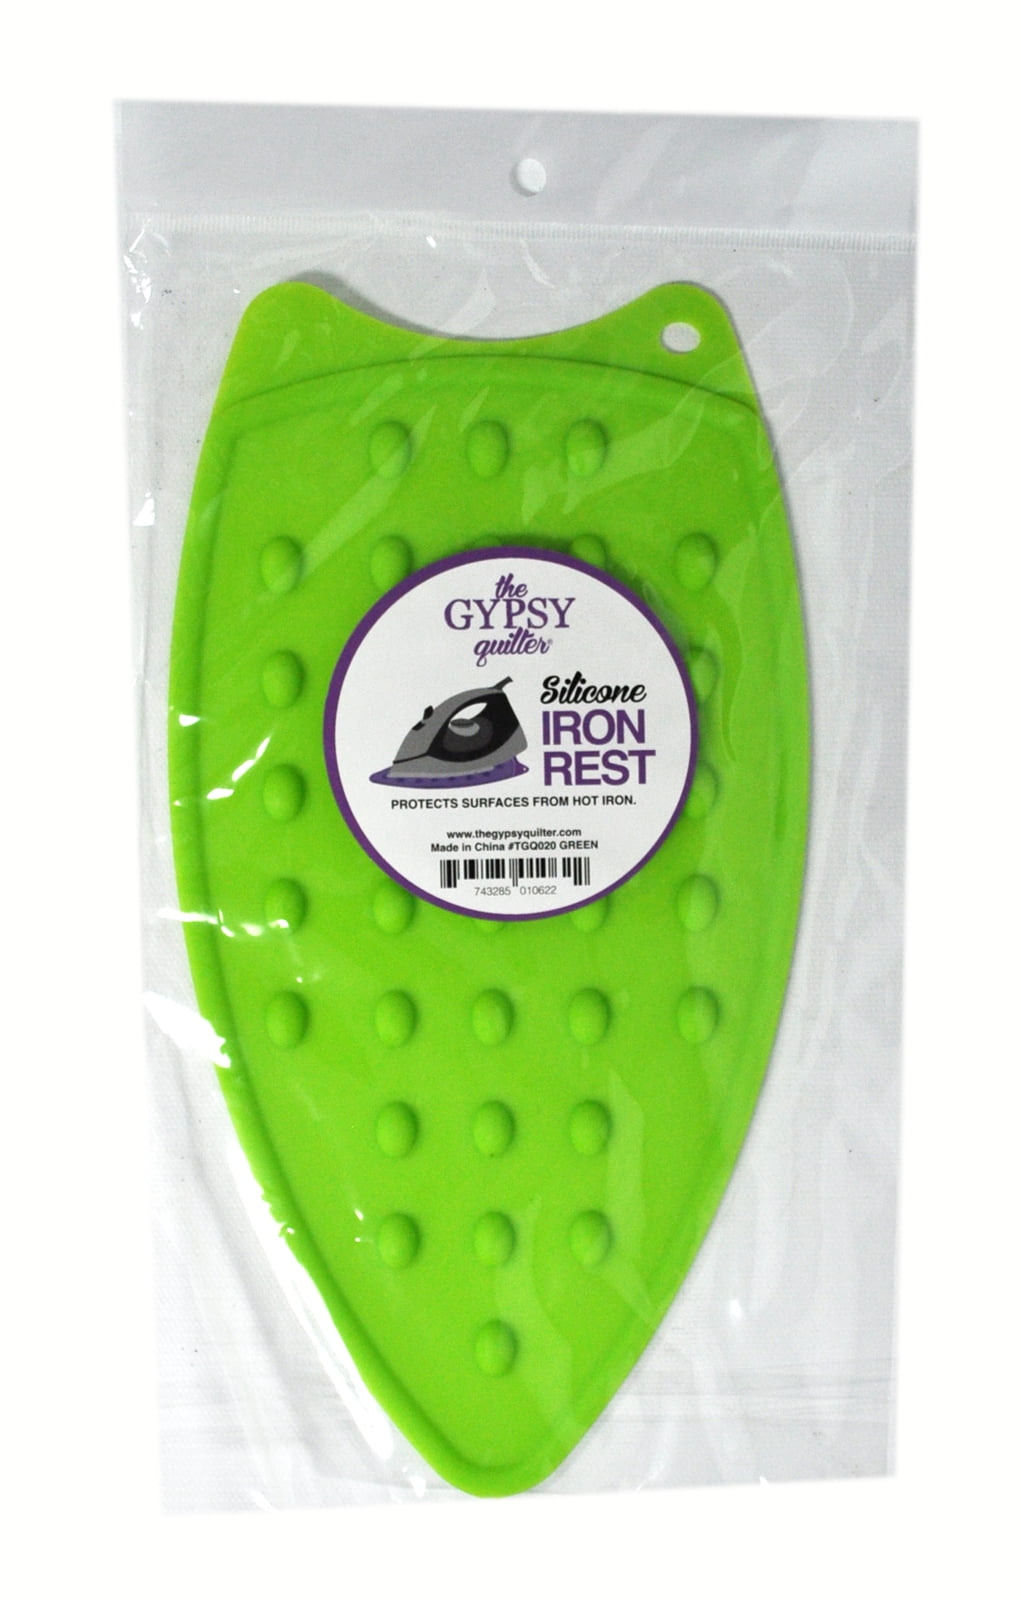 NEW 5 X 9 IRONING IRON REST PAD COMMERCIAL SILICONE RUBBER BV 